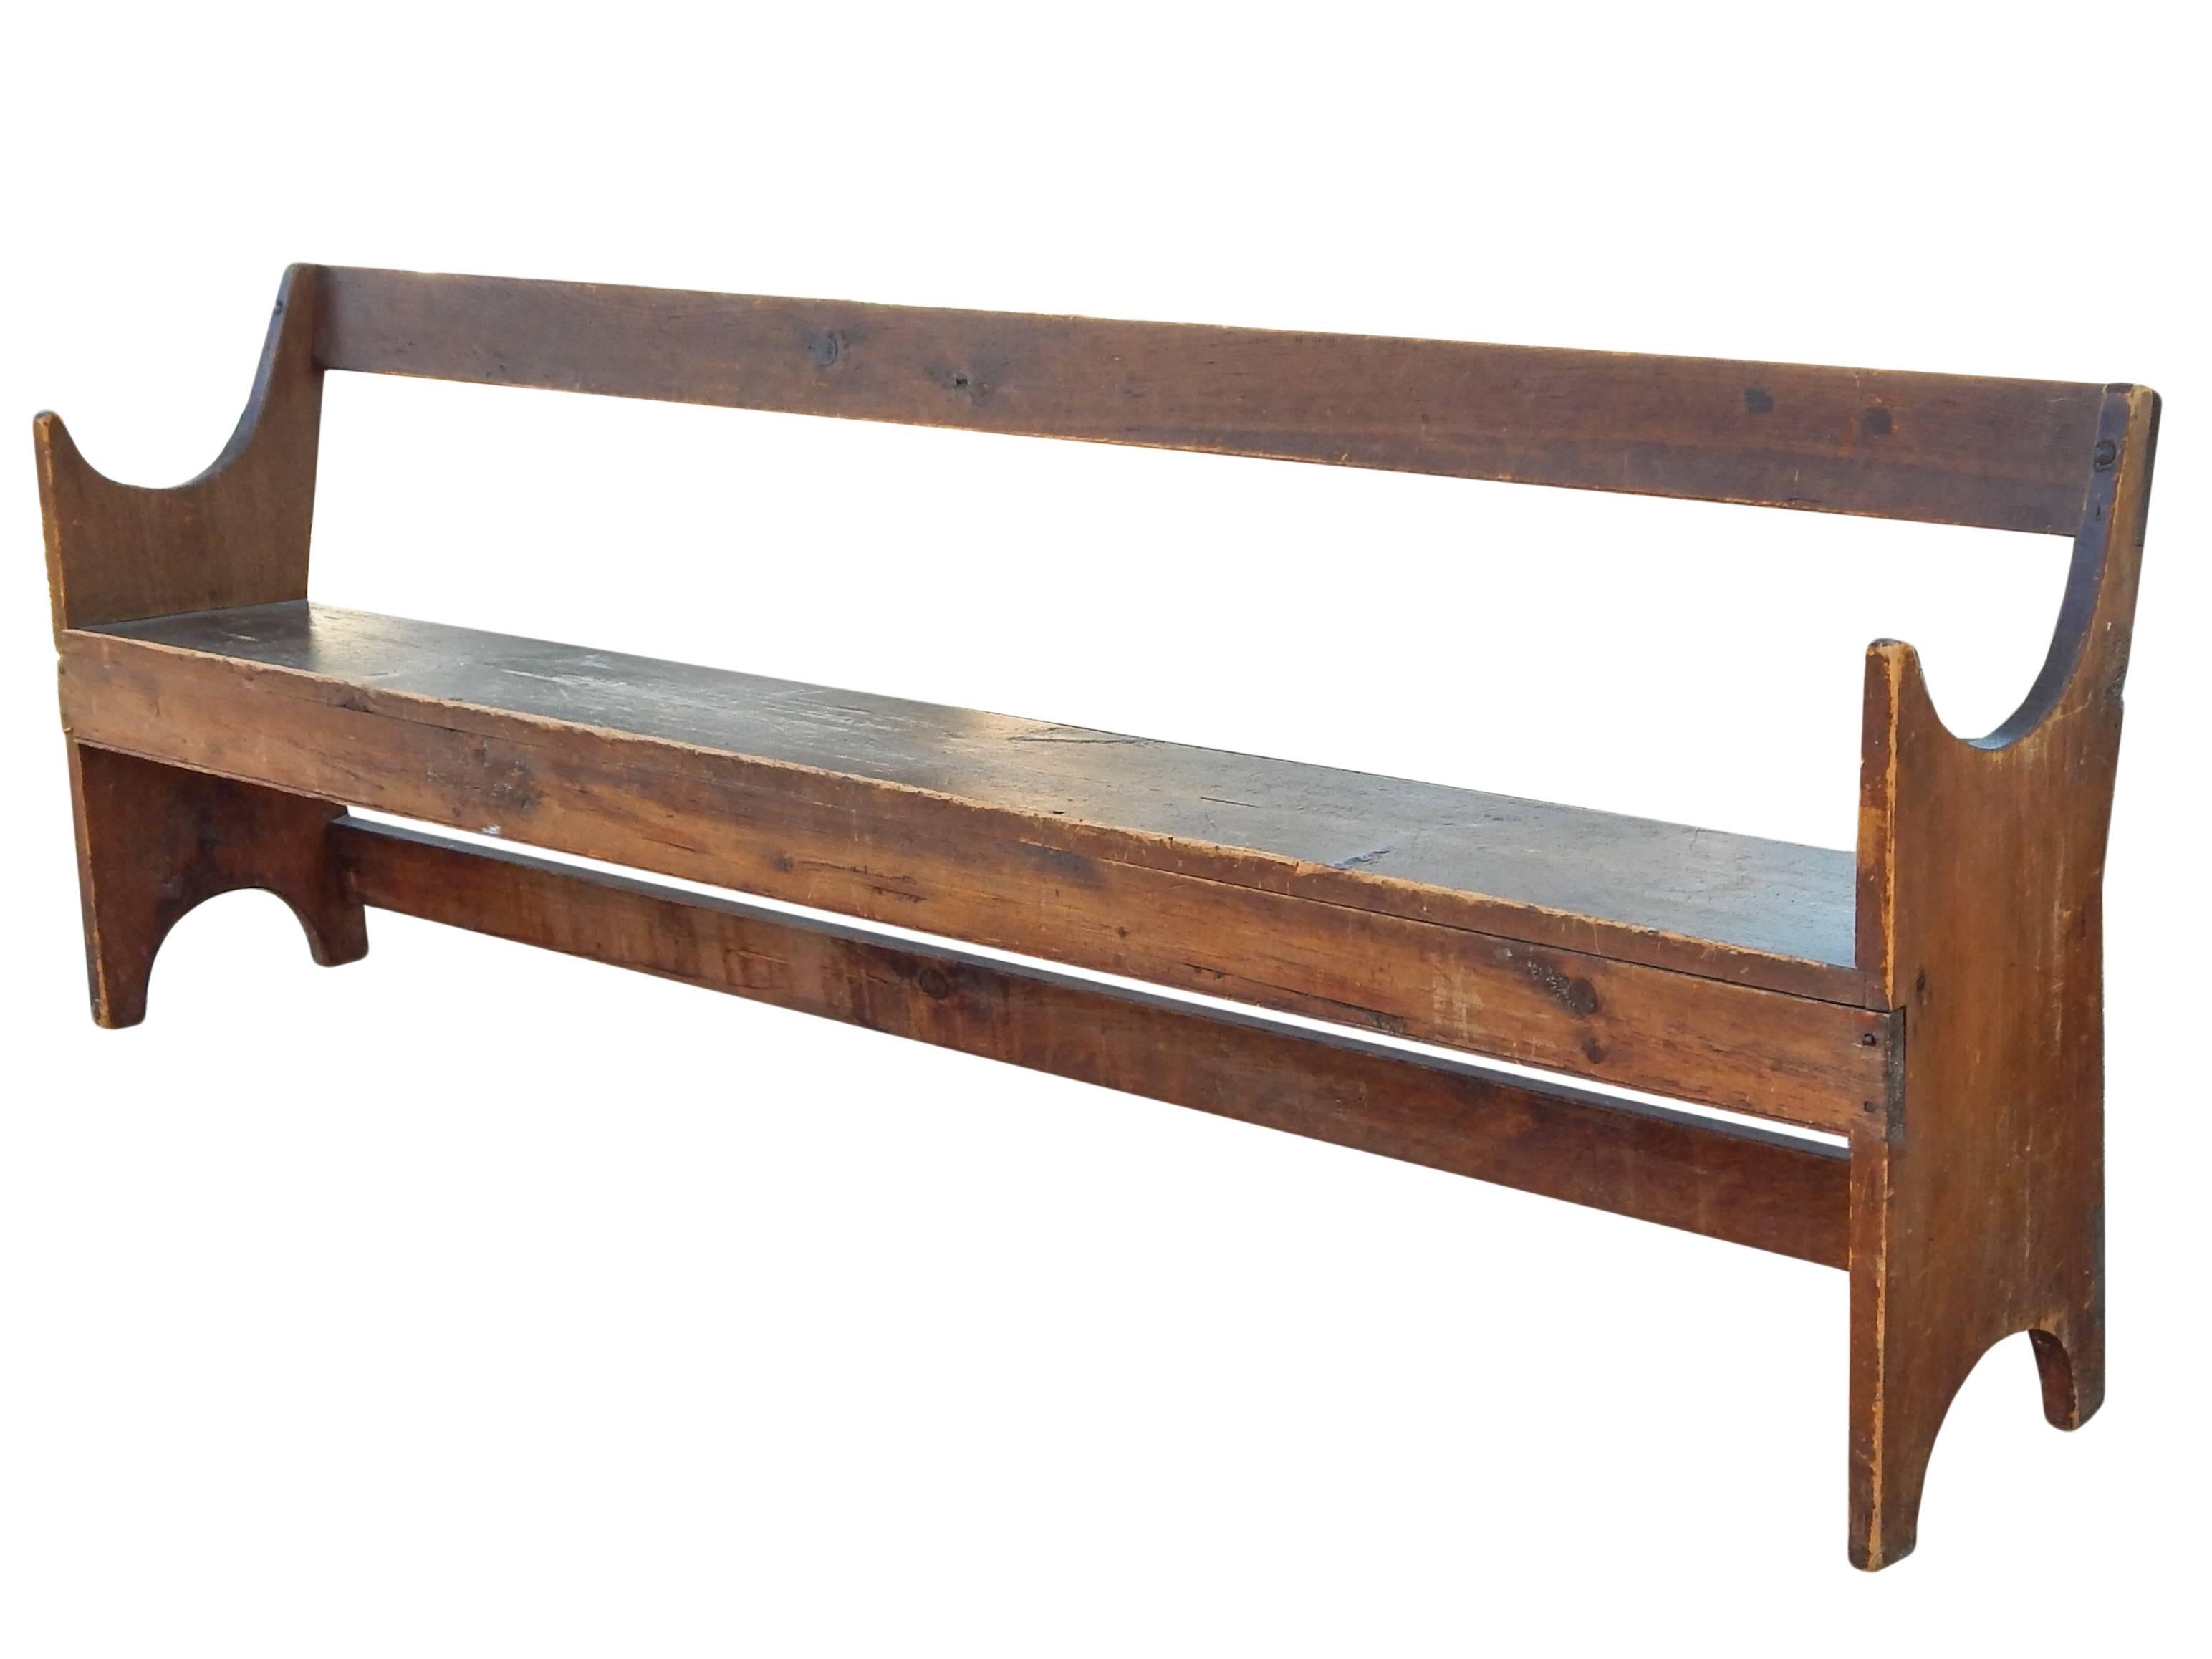 Unusual curved arm wooden bench with great age patina.